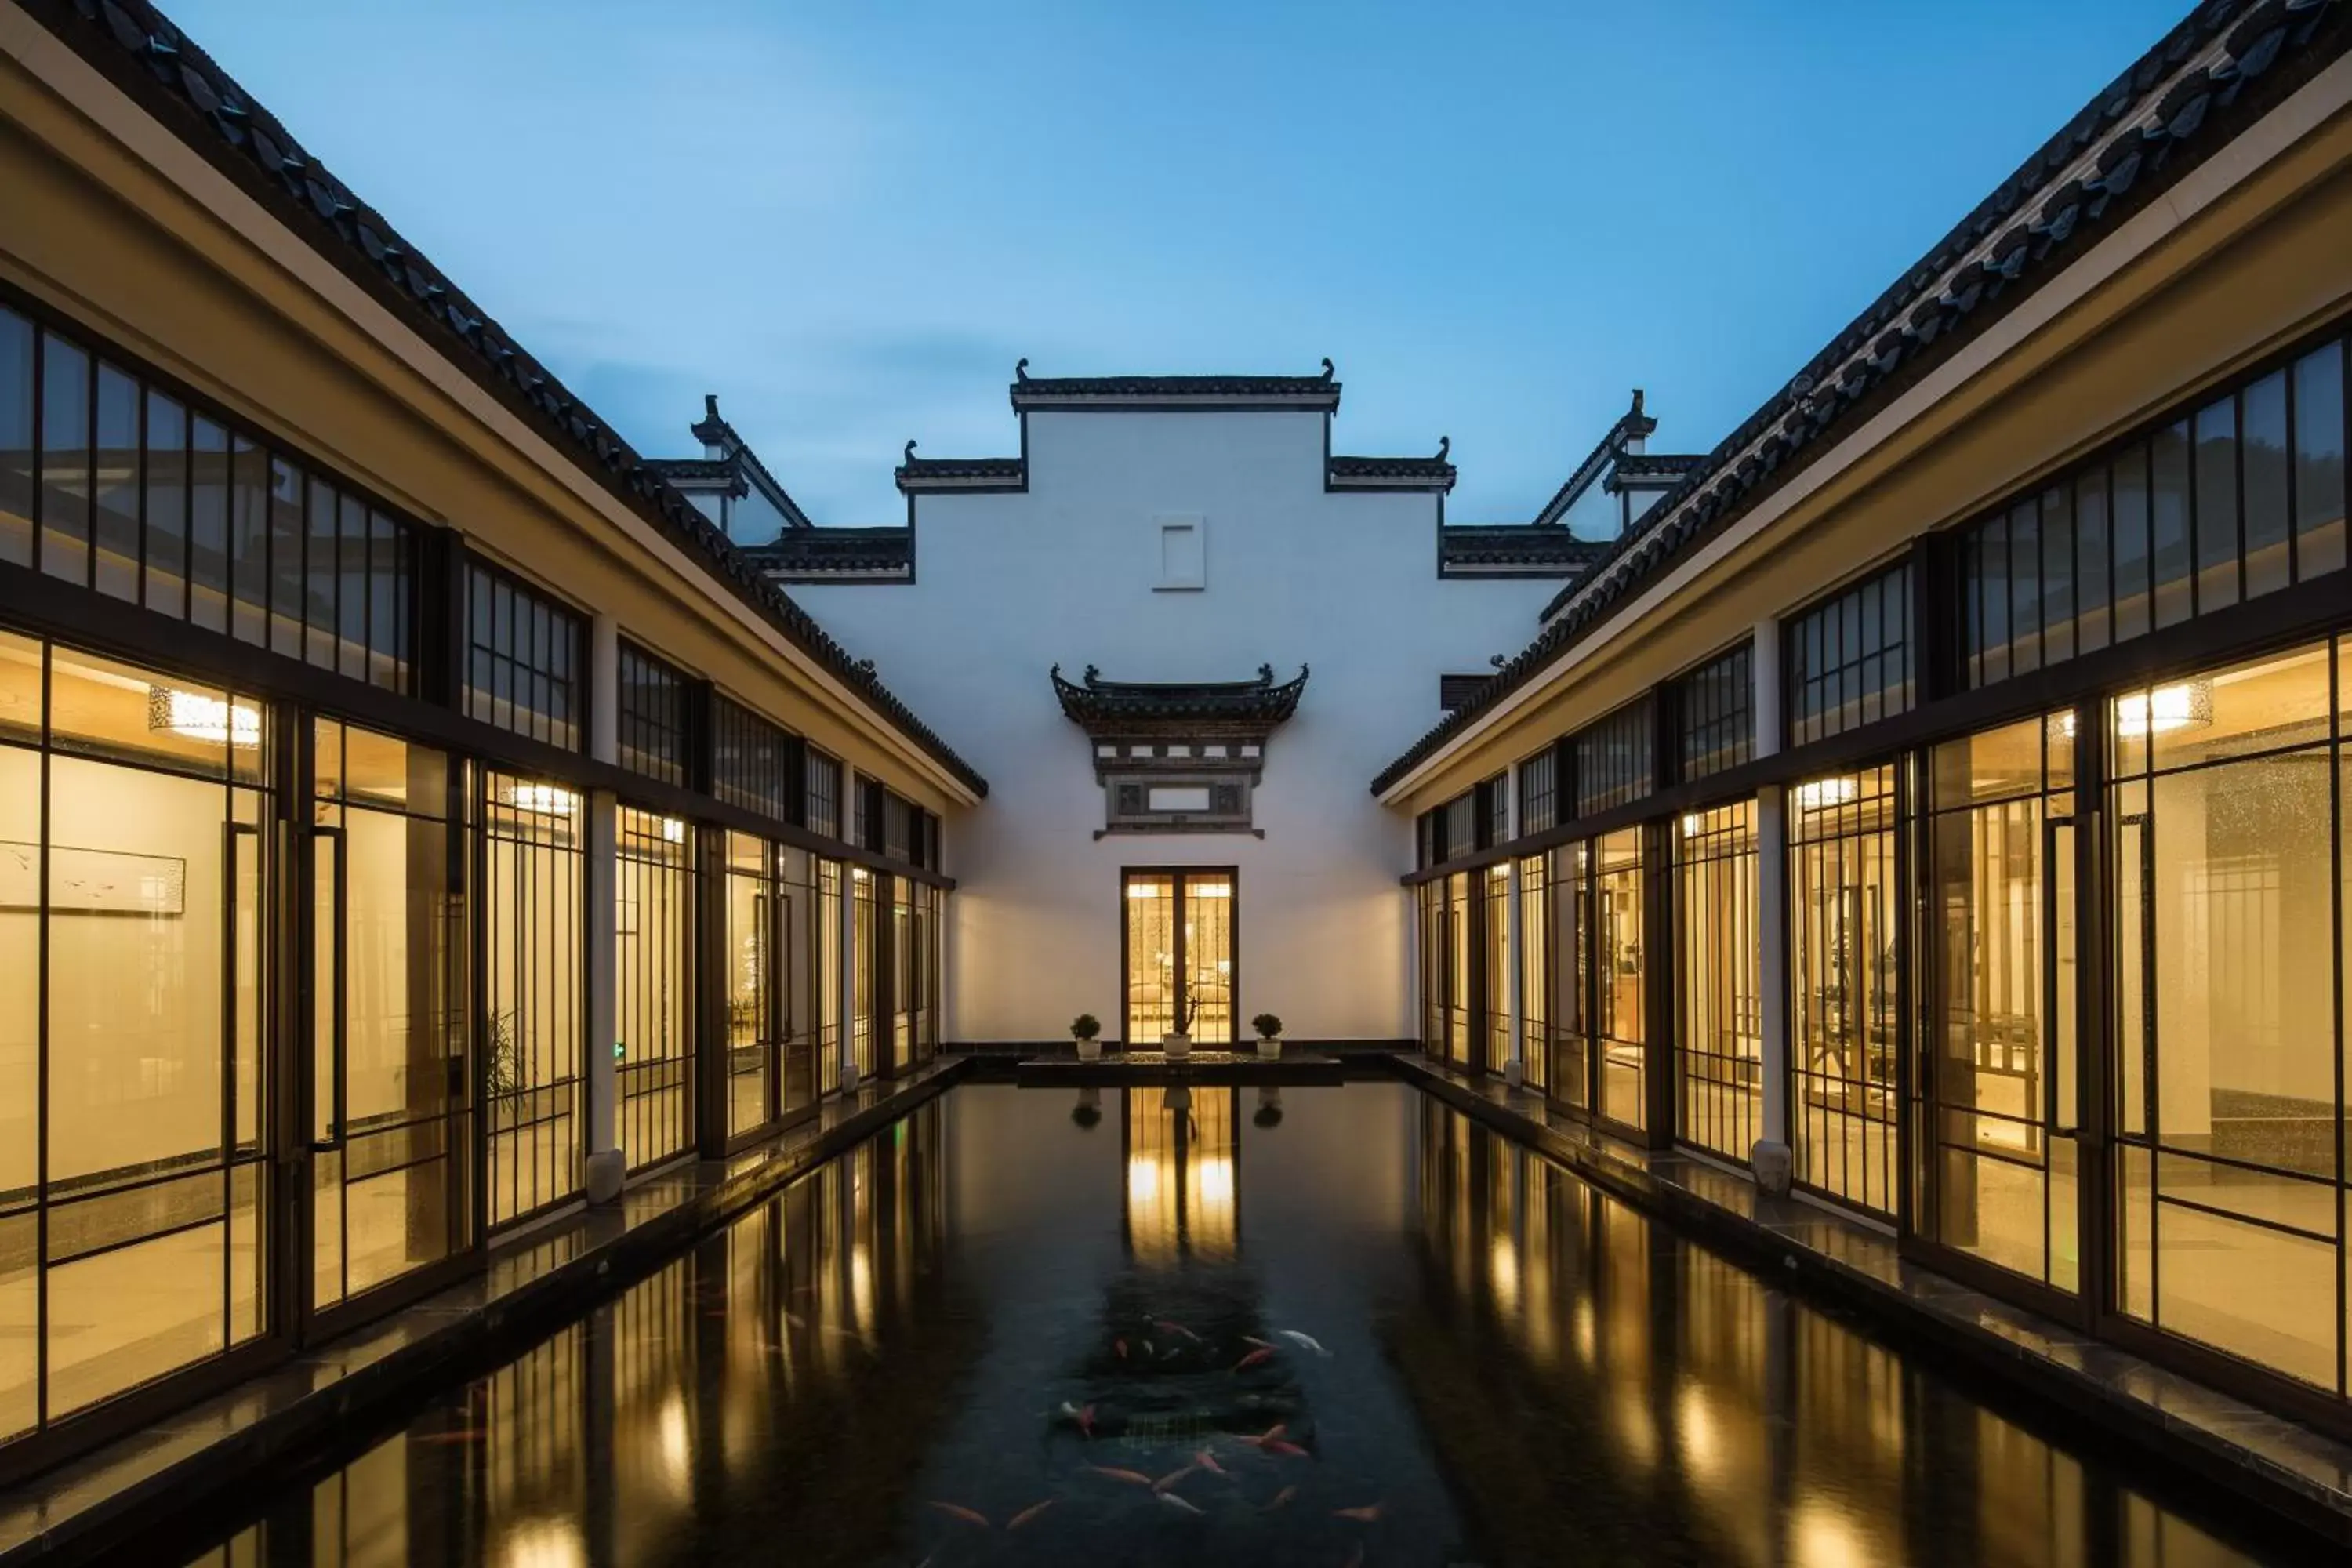 Property building in Banyan Tree Hotel Huangshan-The Ancient Charm of Huizhou, a Paradise